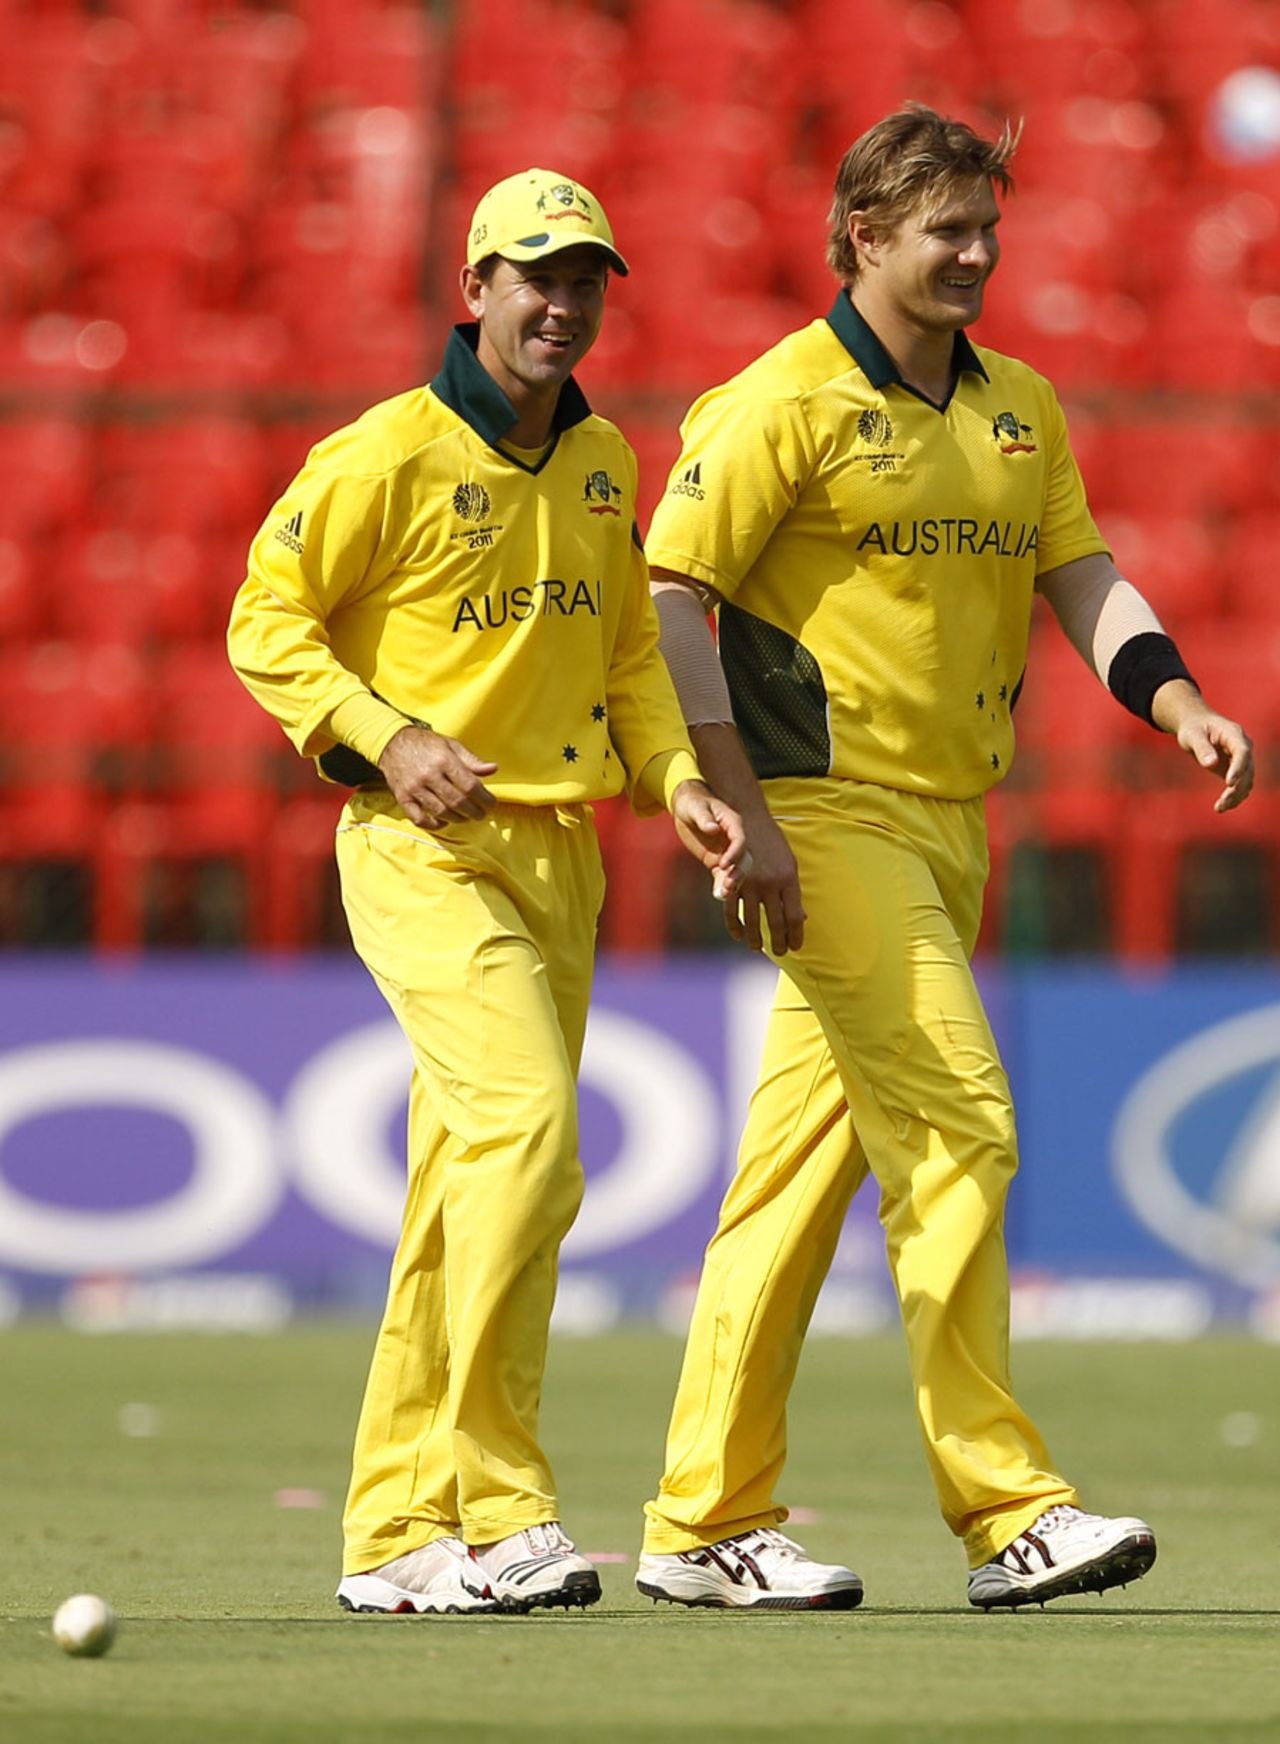 Ricky Ponting and Shane Watson are all smiles after Hiral Patel's dismissal, Australia v Canada, Group A, World Cup, Bangalore, March 16, 2011